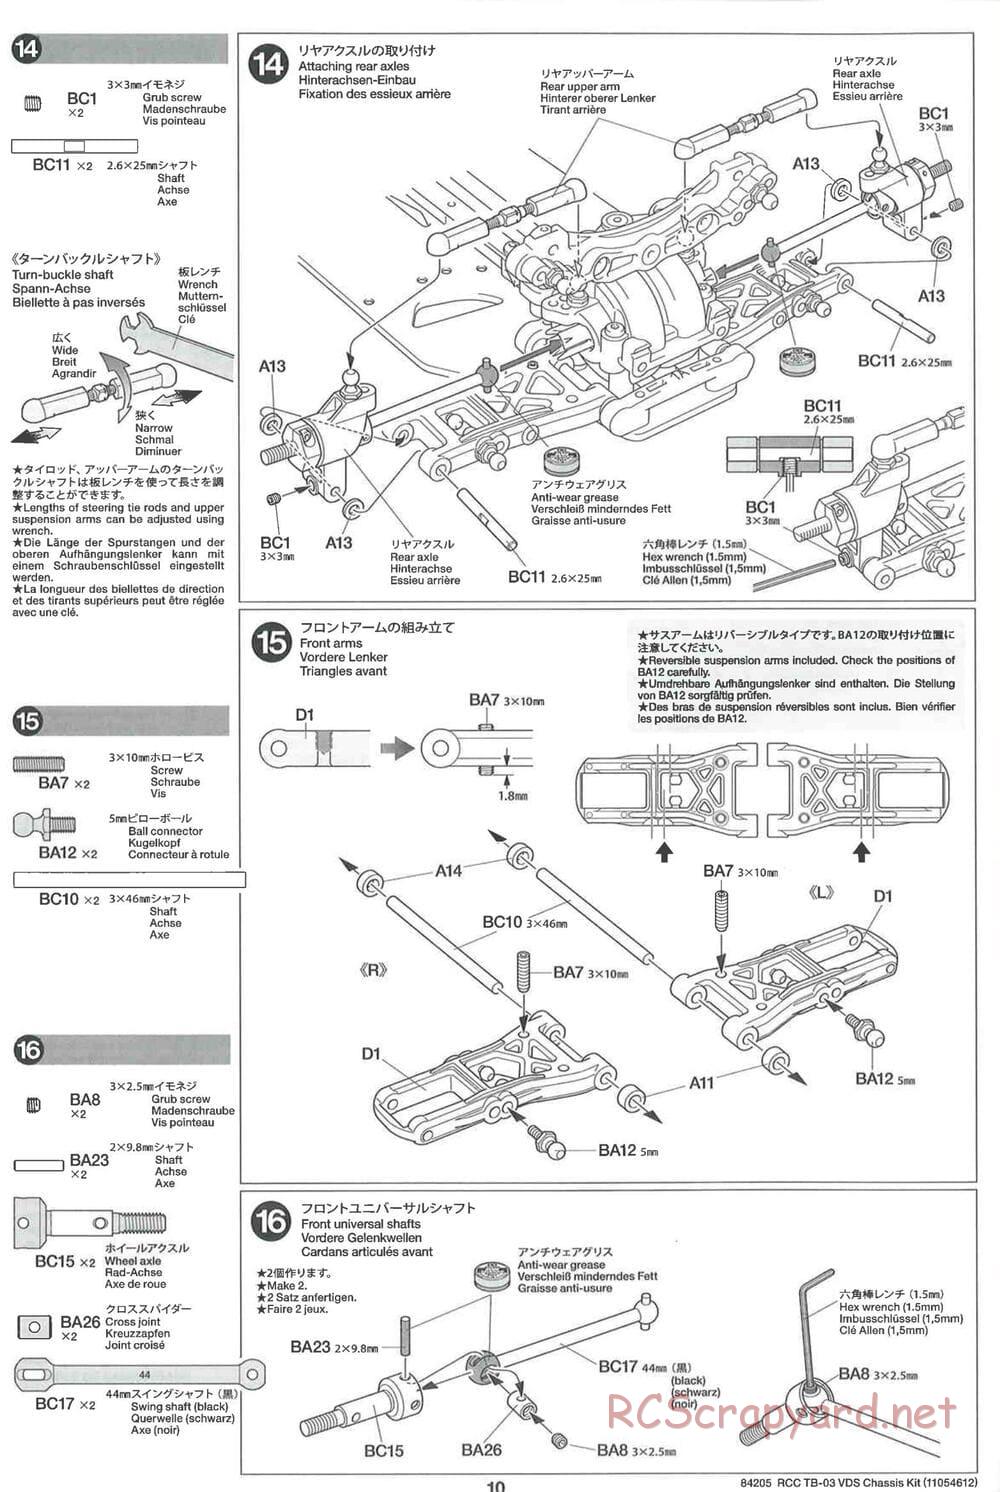 Tamiya - TB-03 VDS Drift Spec Chassis - Manual - Page 10